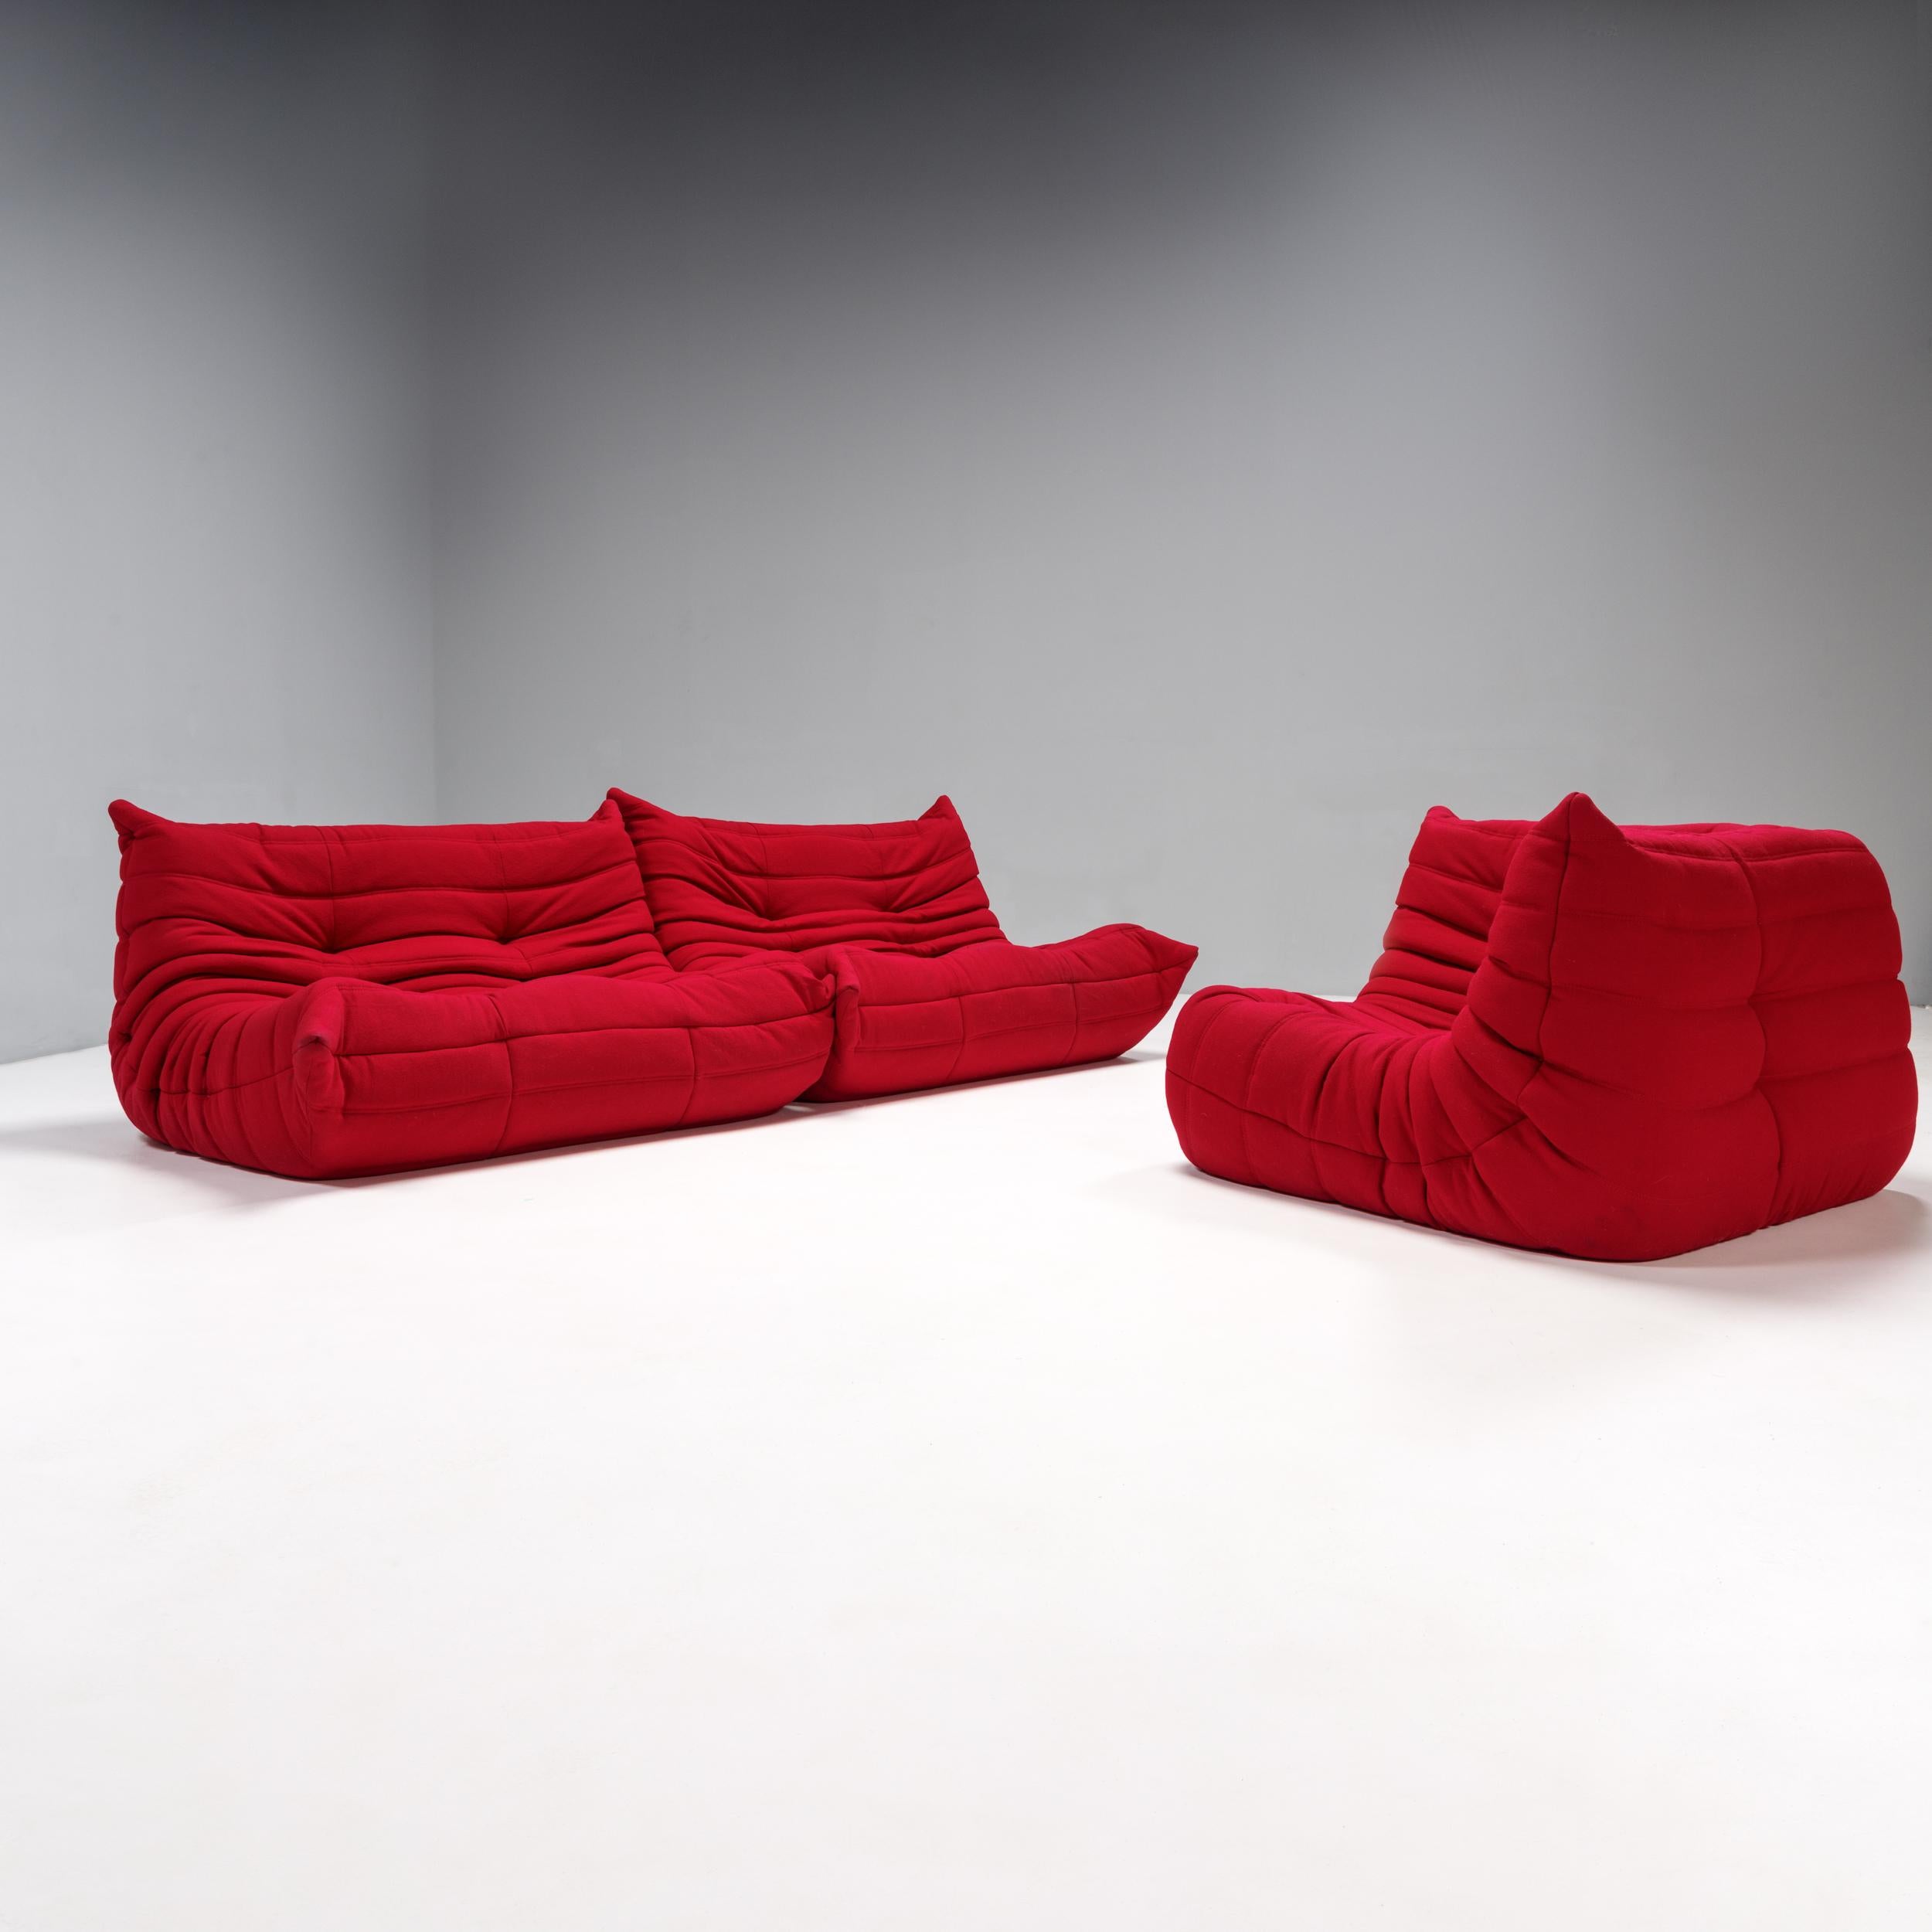 The iconic Togo sofa, originally designed by Michel Ducaroy for Ligne Roset in 1973 has become a design Classic.

This three-piece modular set is incredibly versatile and can be configured into one large corner sofa or split for a multitude of